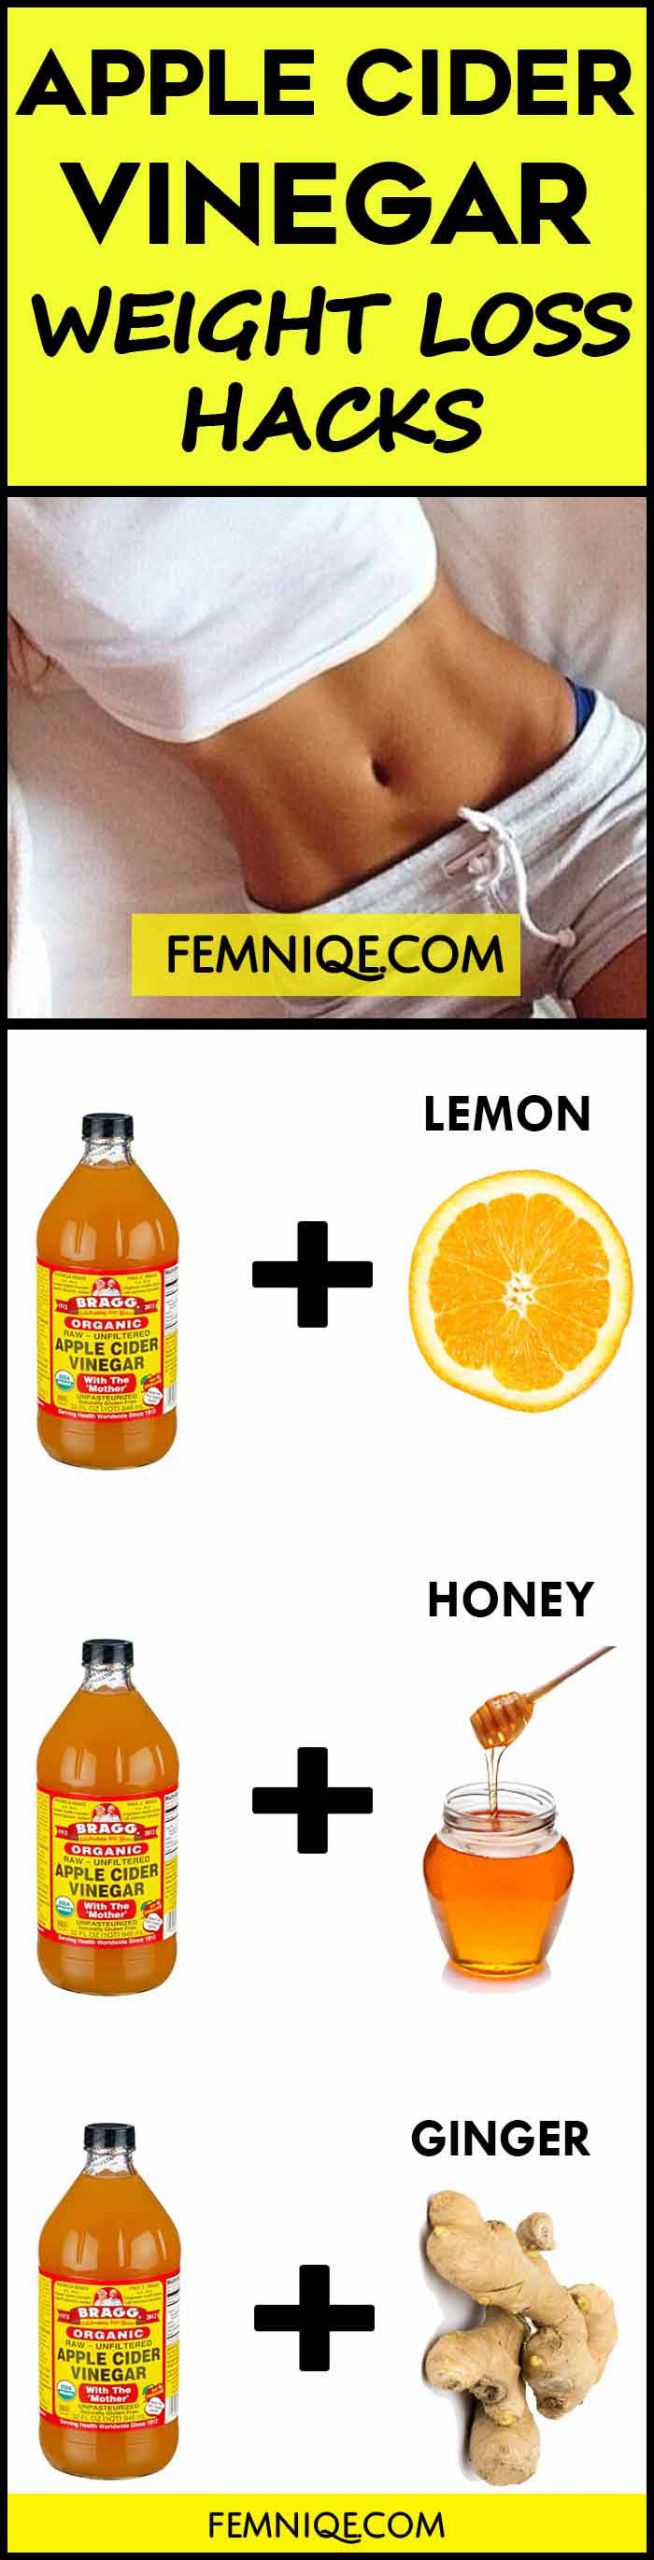 Apple Cider Vinegar Weight Loss Results
 How To Use Apple Cider Vinegar for Weight Loss Femniqe